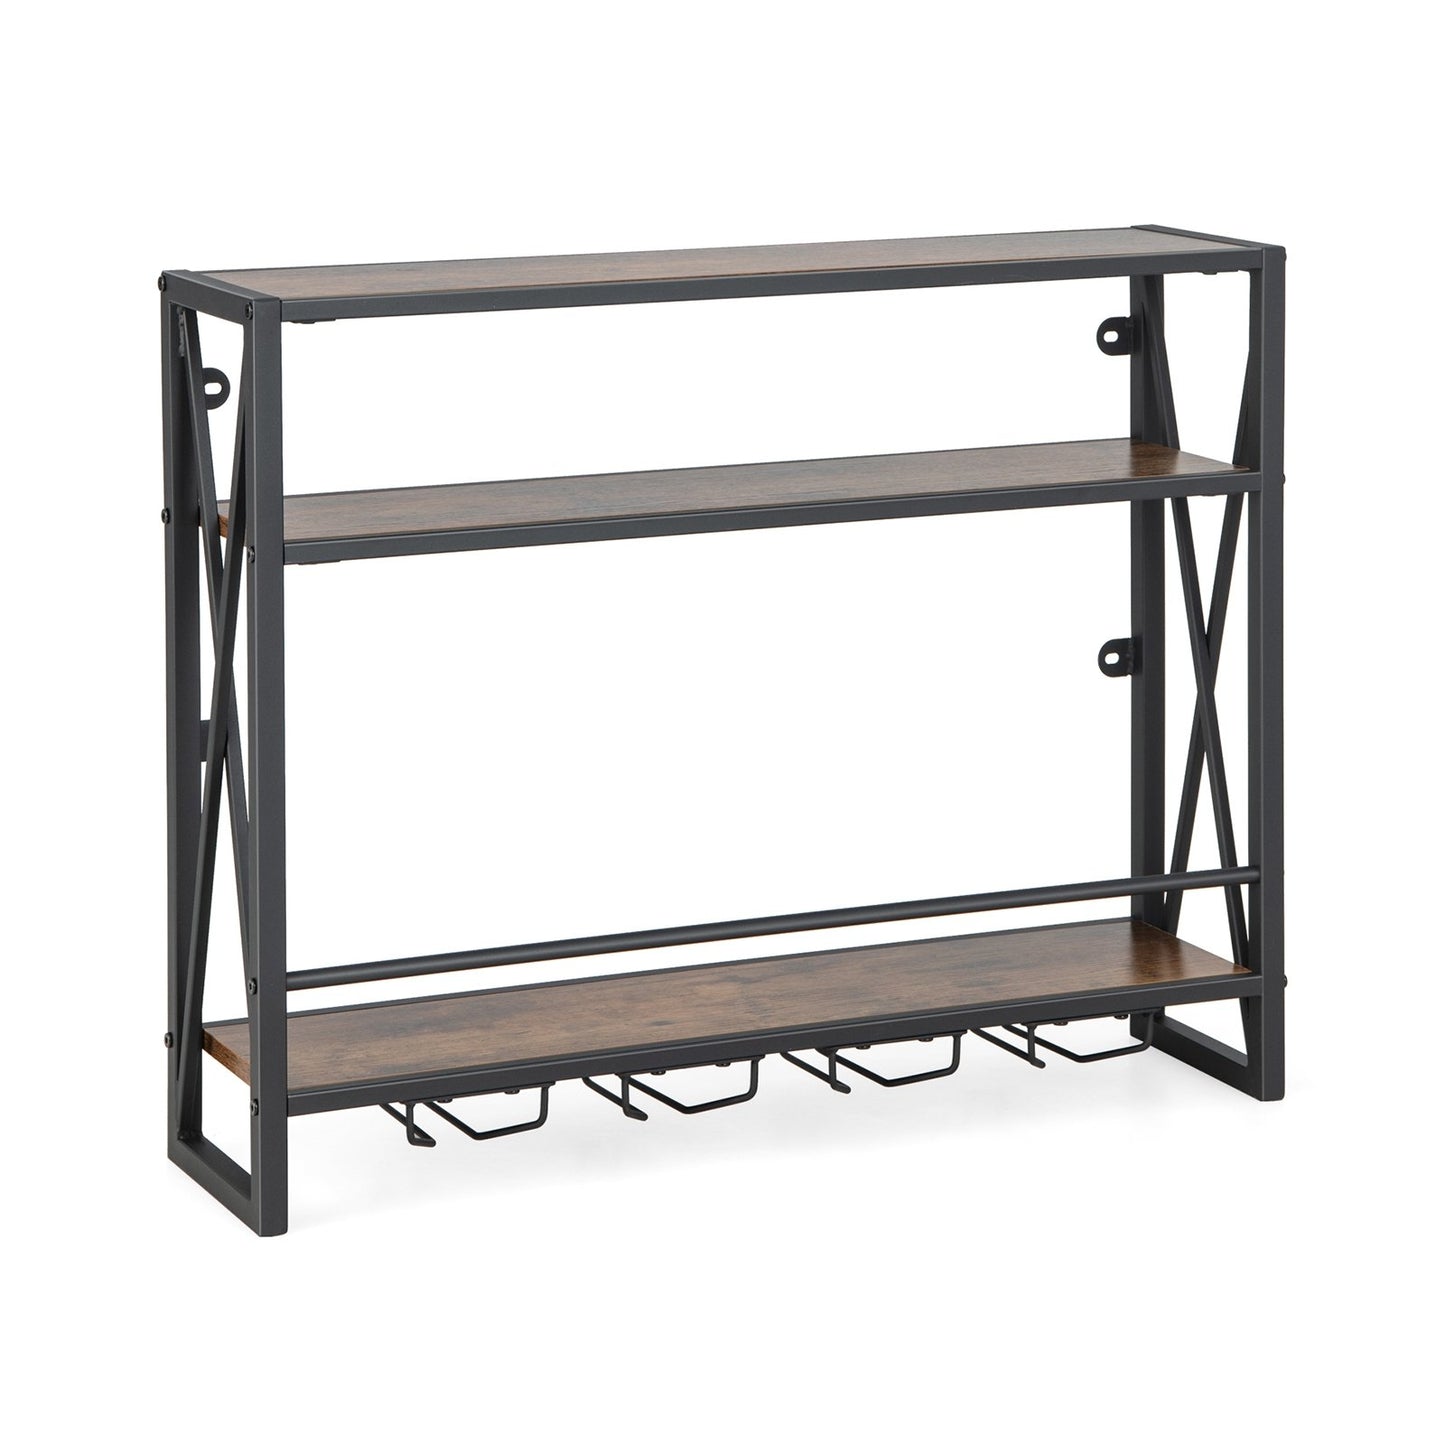 3-Tiers Industrial Wall Mounted Wine Rack with Glass Holder and Metal Frame, Rustic Brown